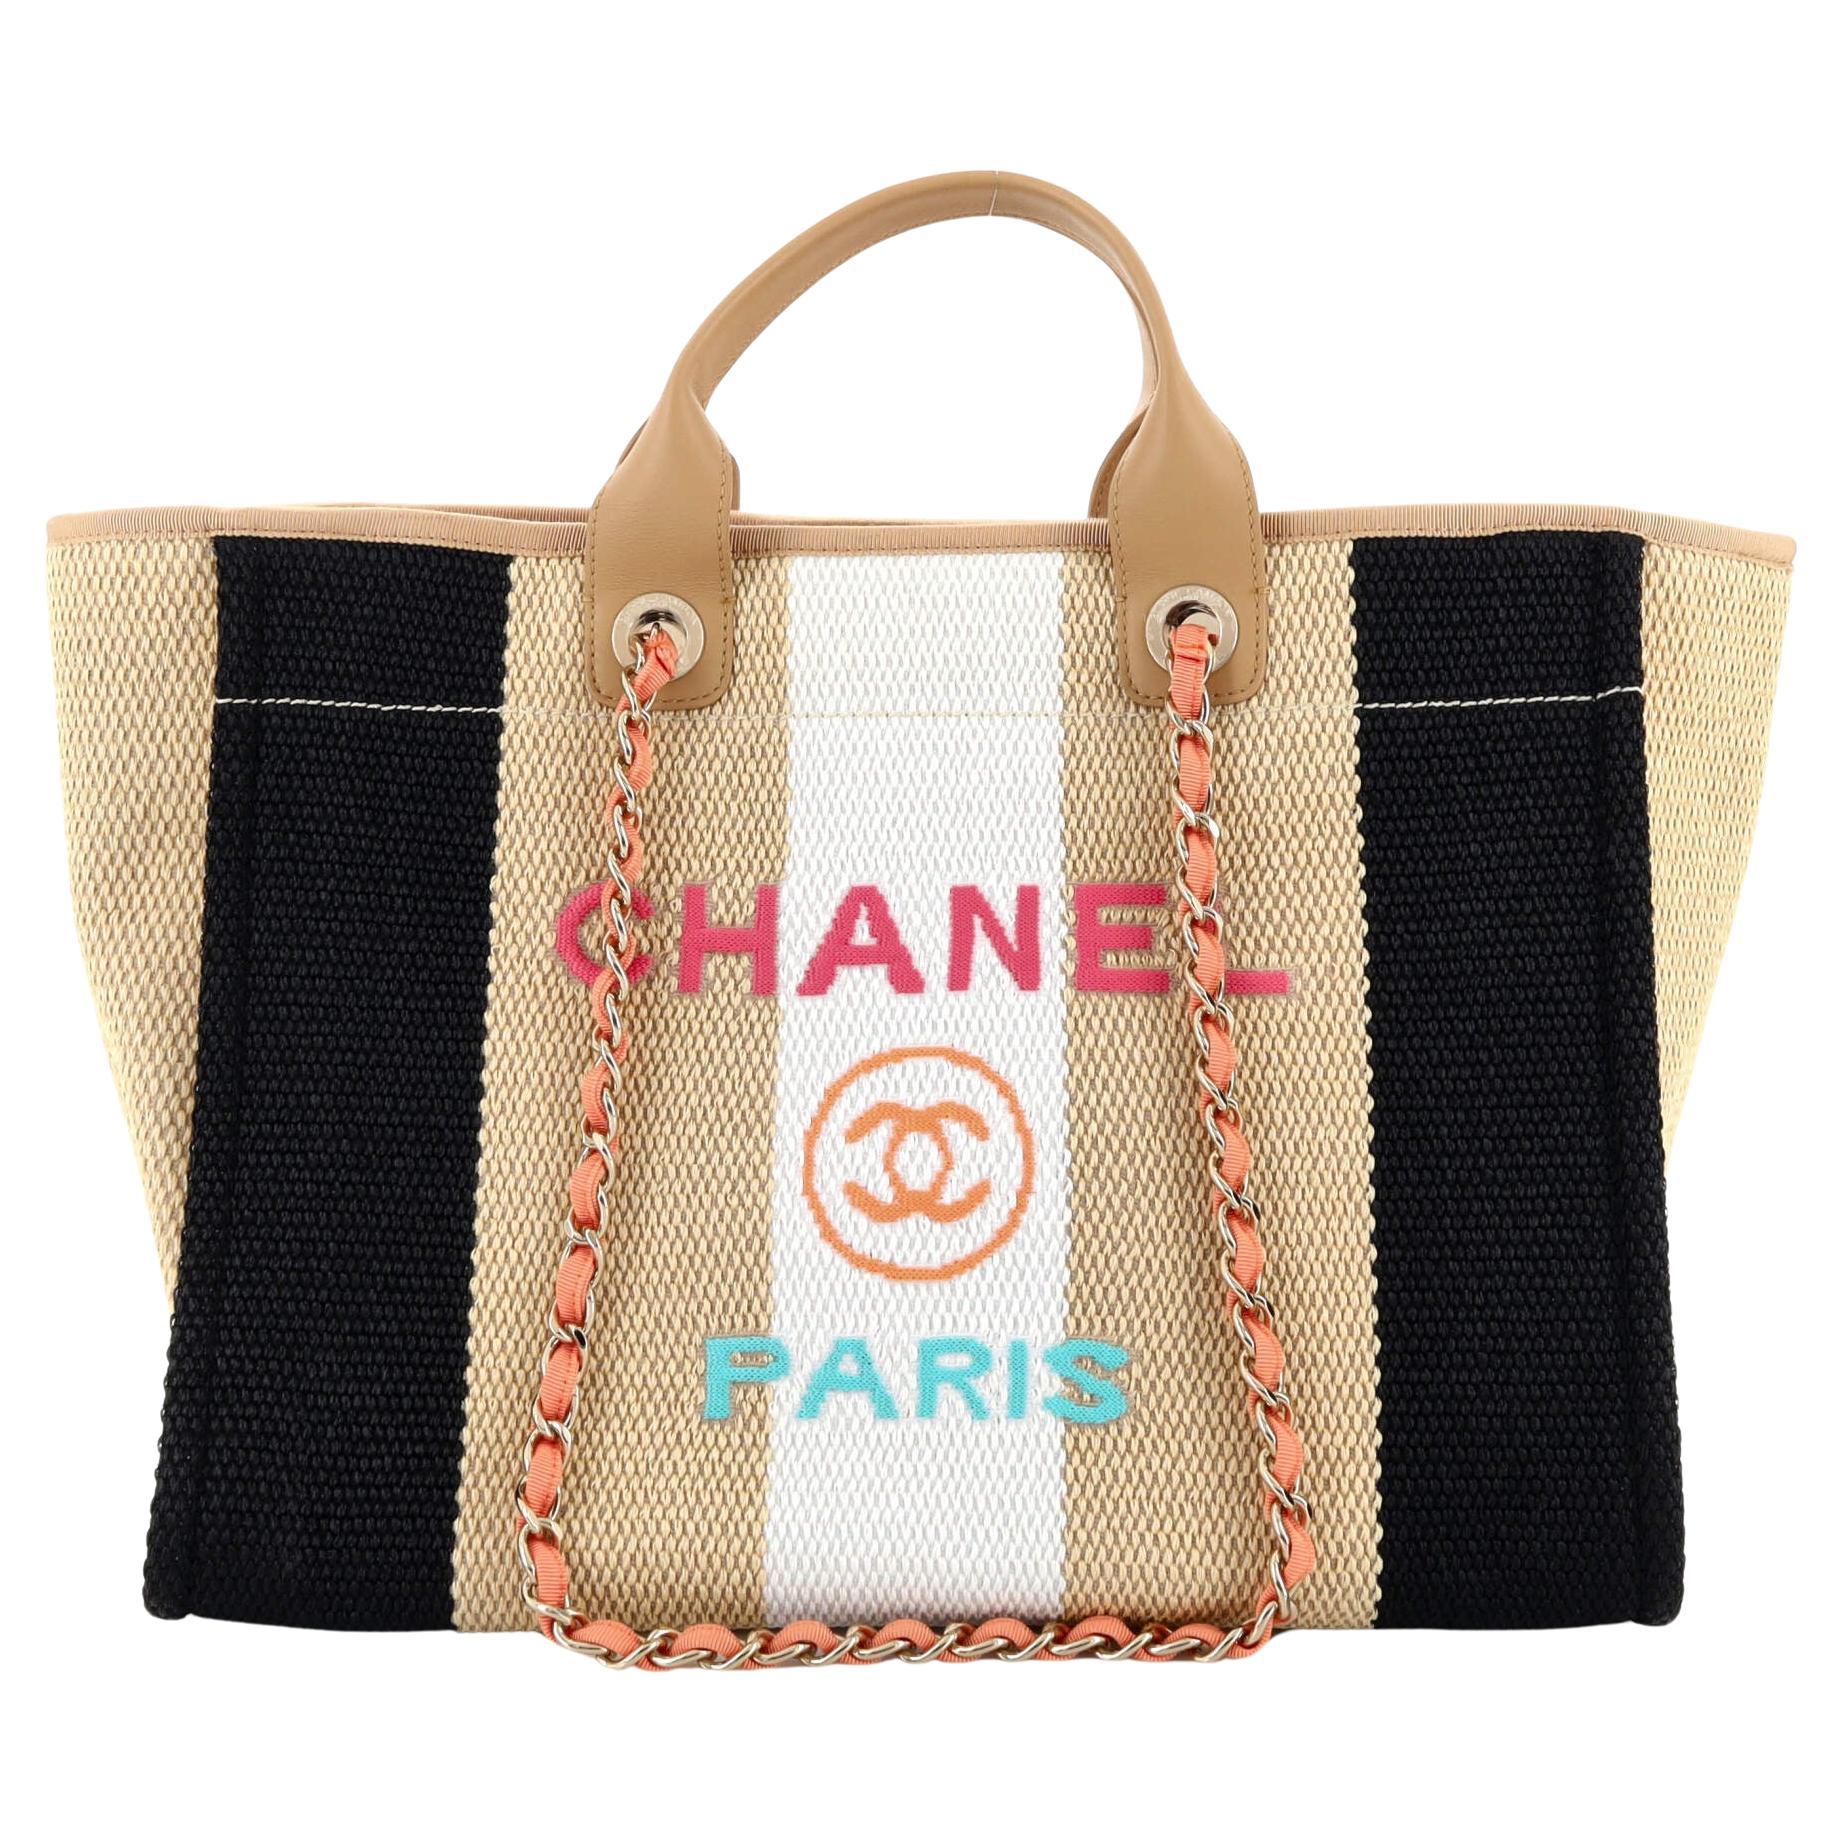 Chanel Deauville Tote Canvas - 21 For Sale on 1stDibs  chanel deauville  tote canvas medium, chanel deauville tote small, chanel.deauville tote